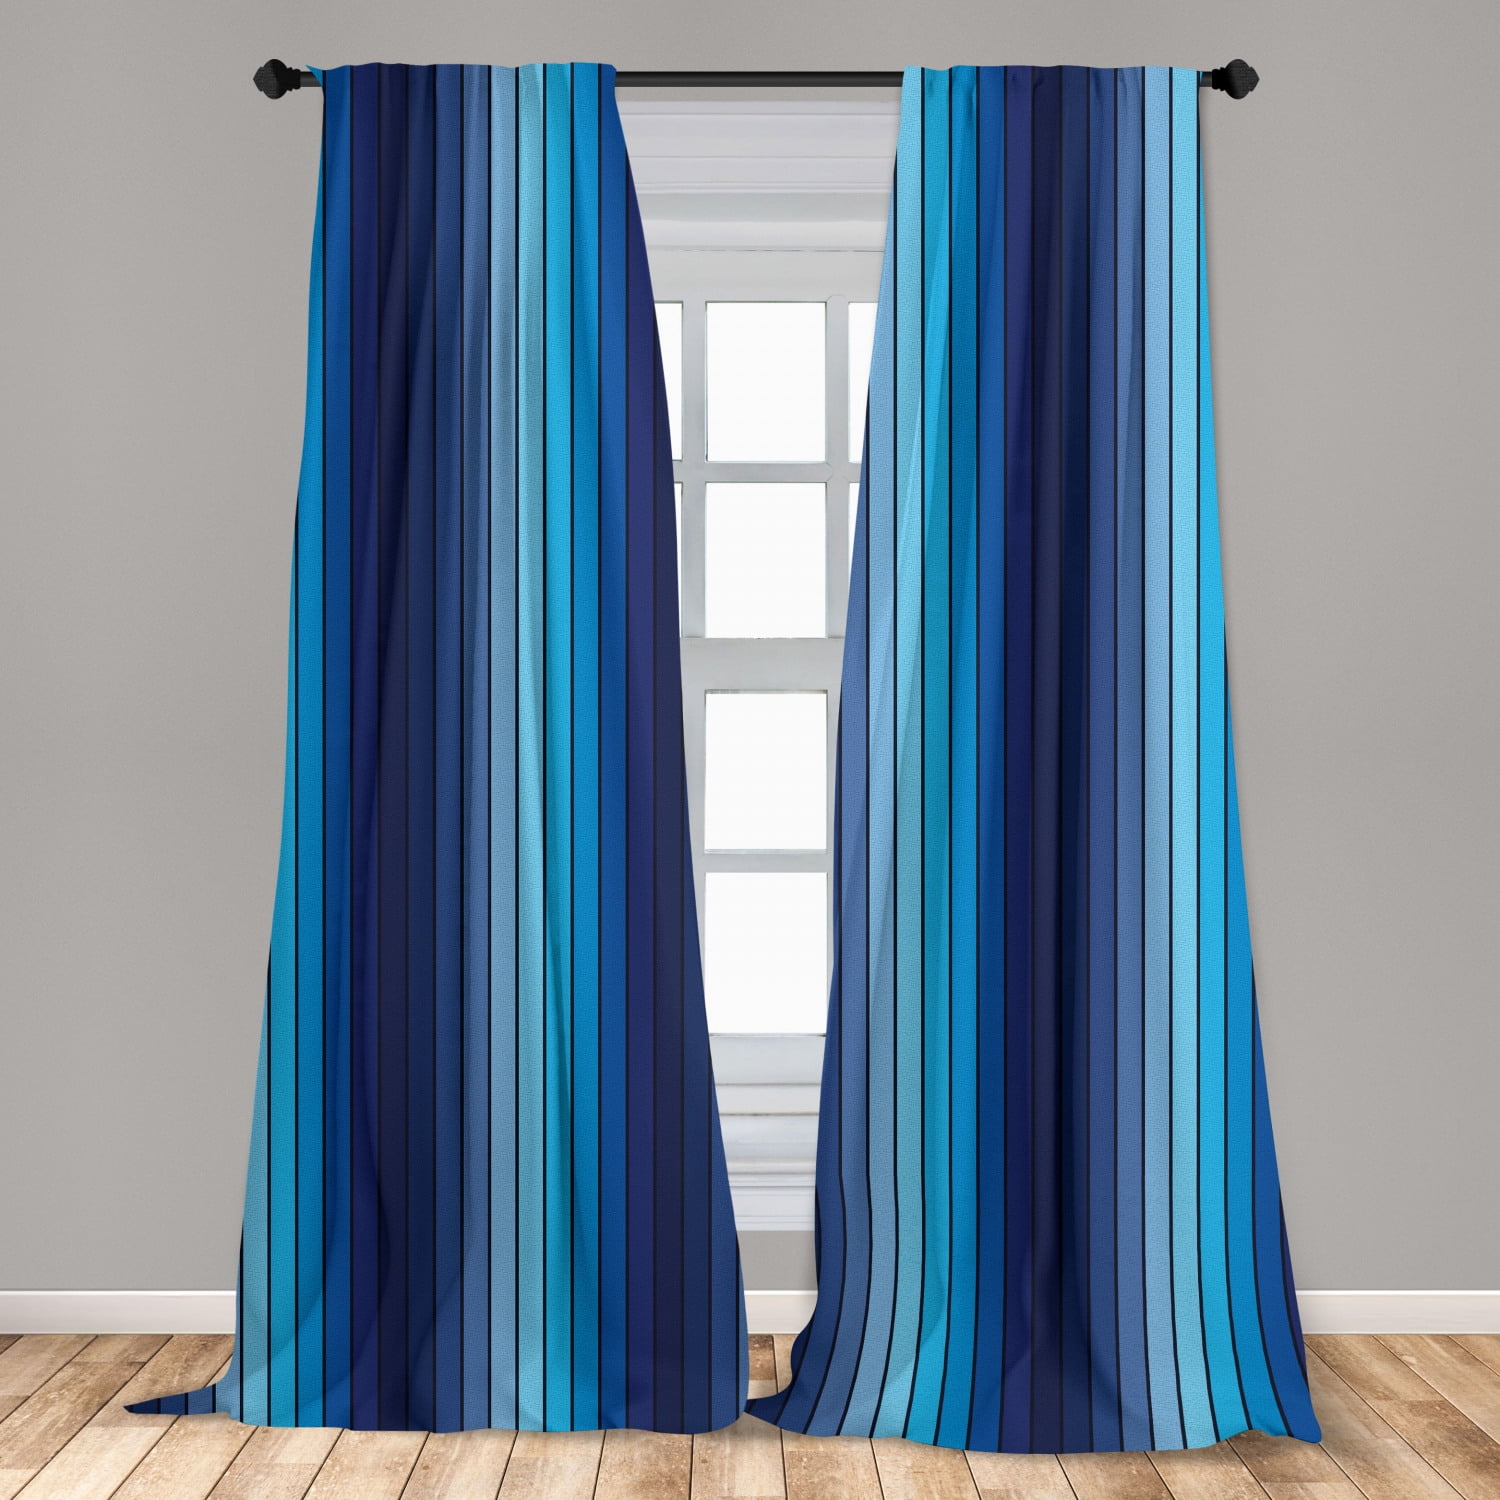 Printed Microfiber Fabric 2 Panel Curtain Set with 3 Different Sizes by 